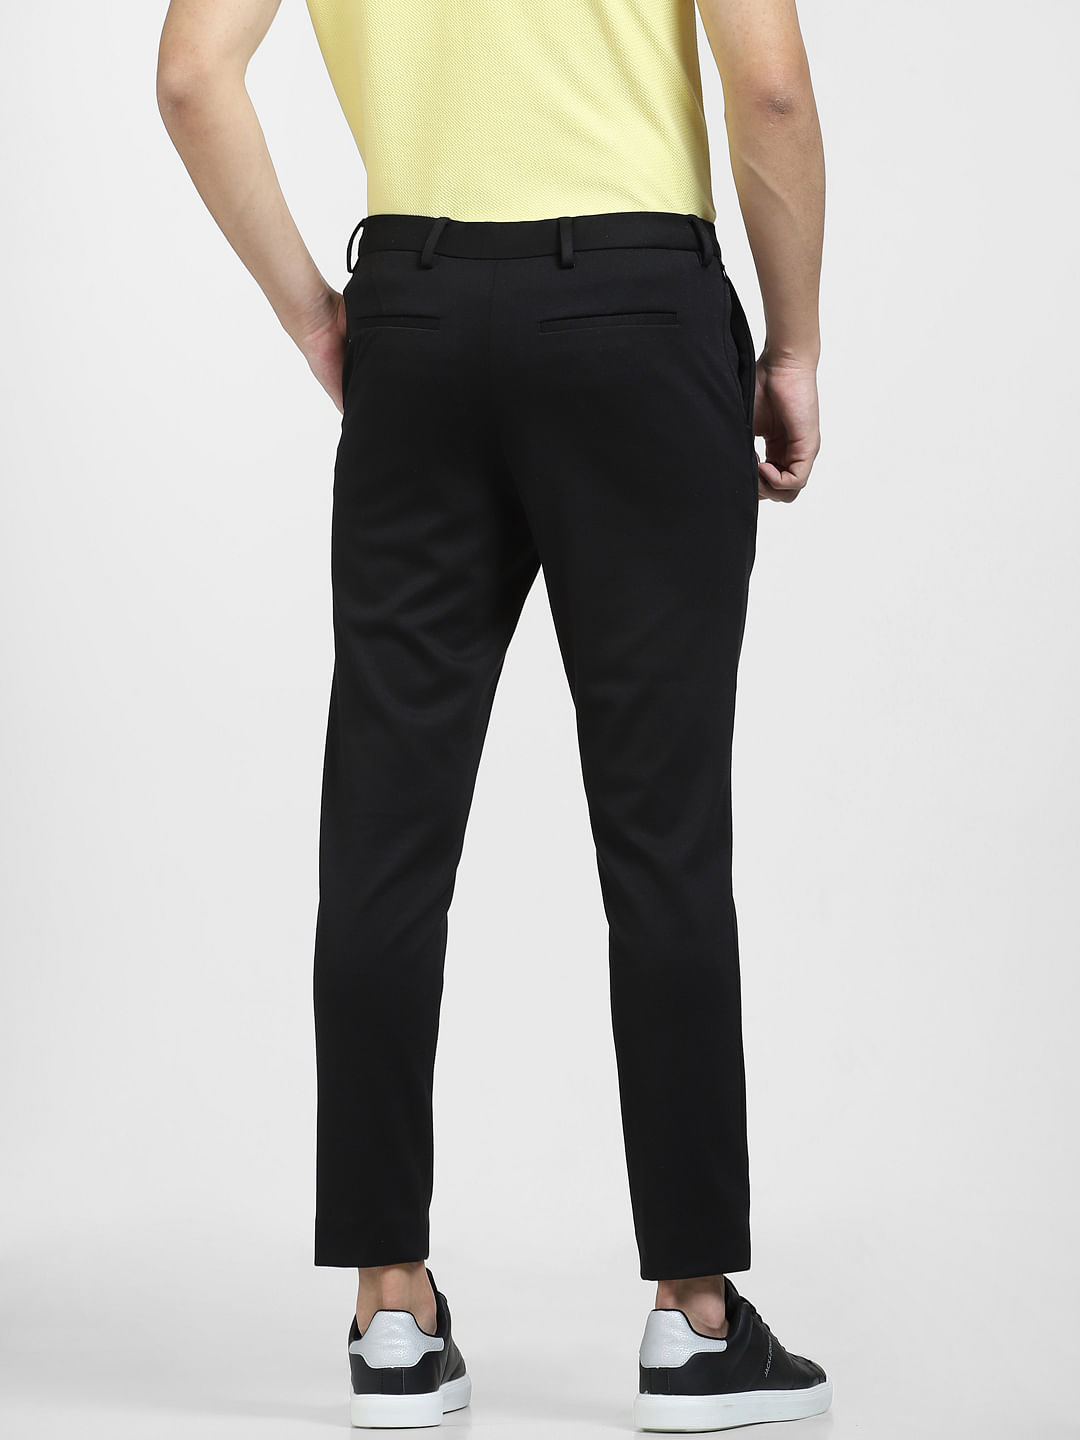 Buy Regular Fit Men Trousers Blue and Black Combo of 2 Polyester Blend for  Best Price Reviews Free Shipping